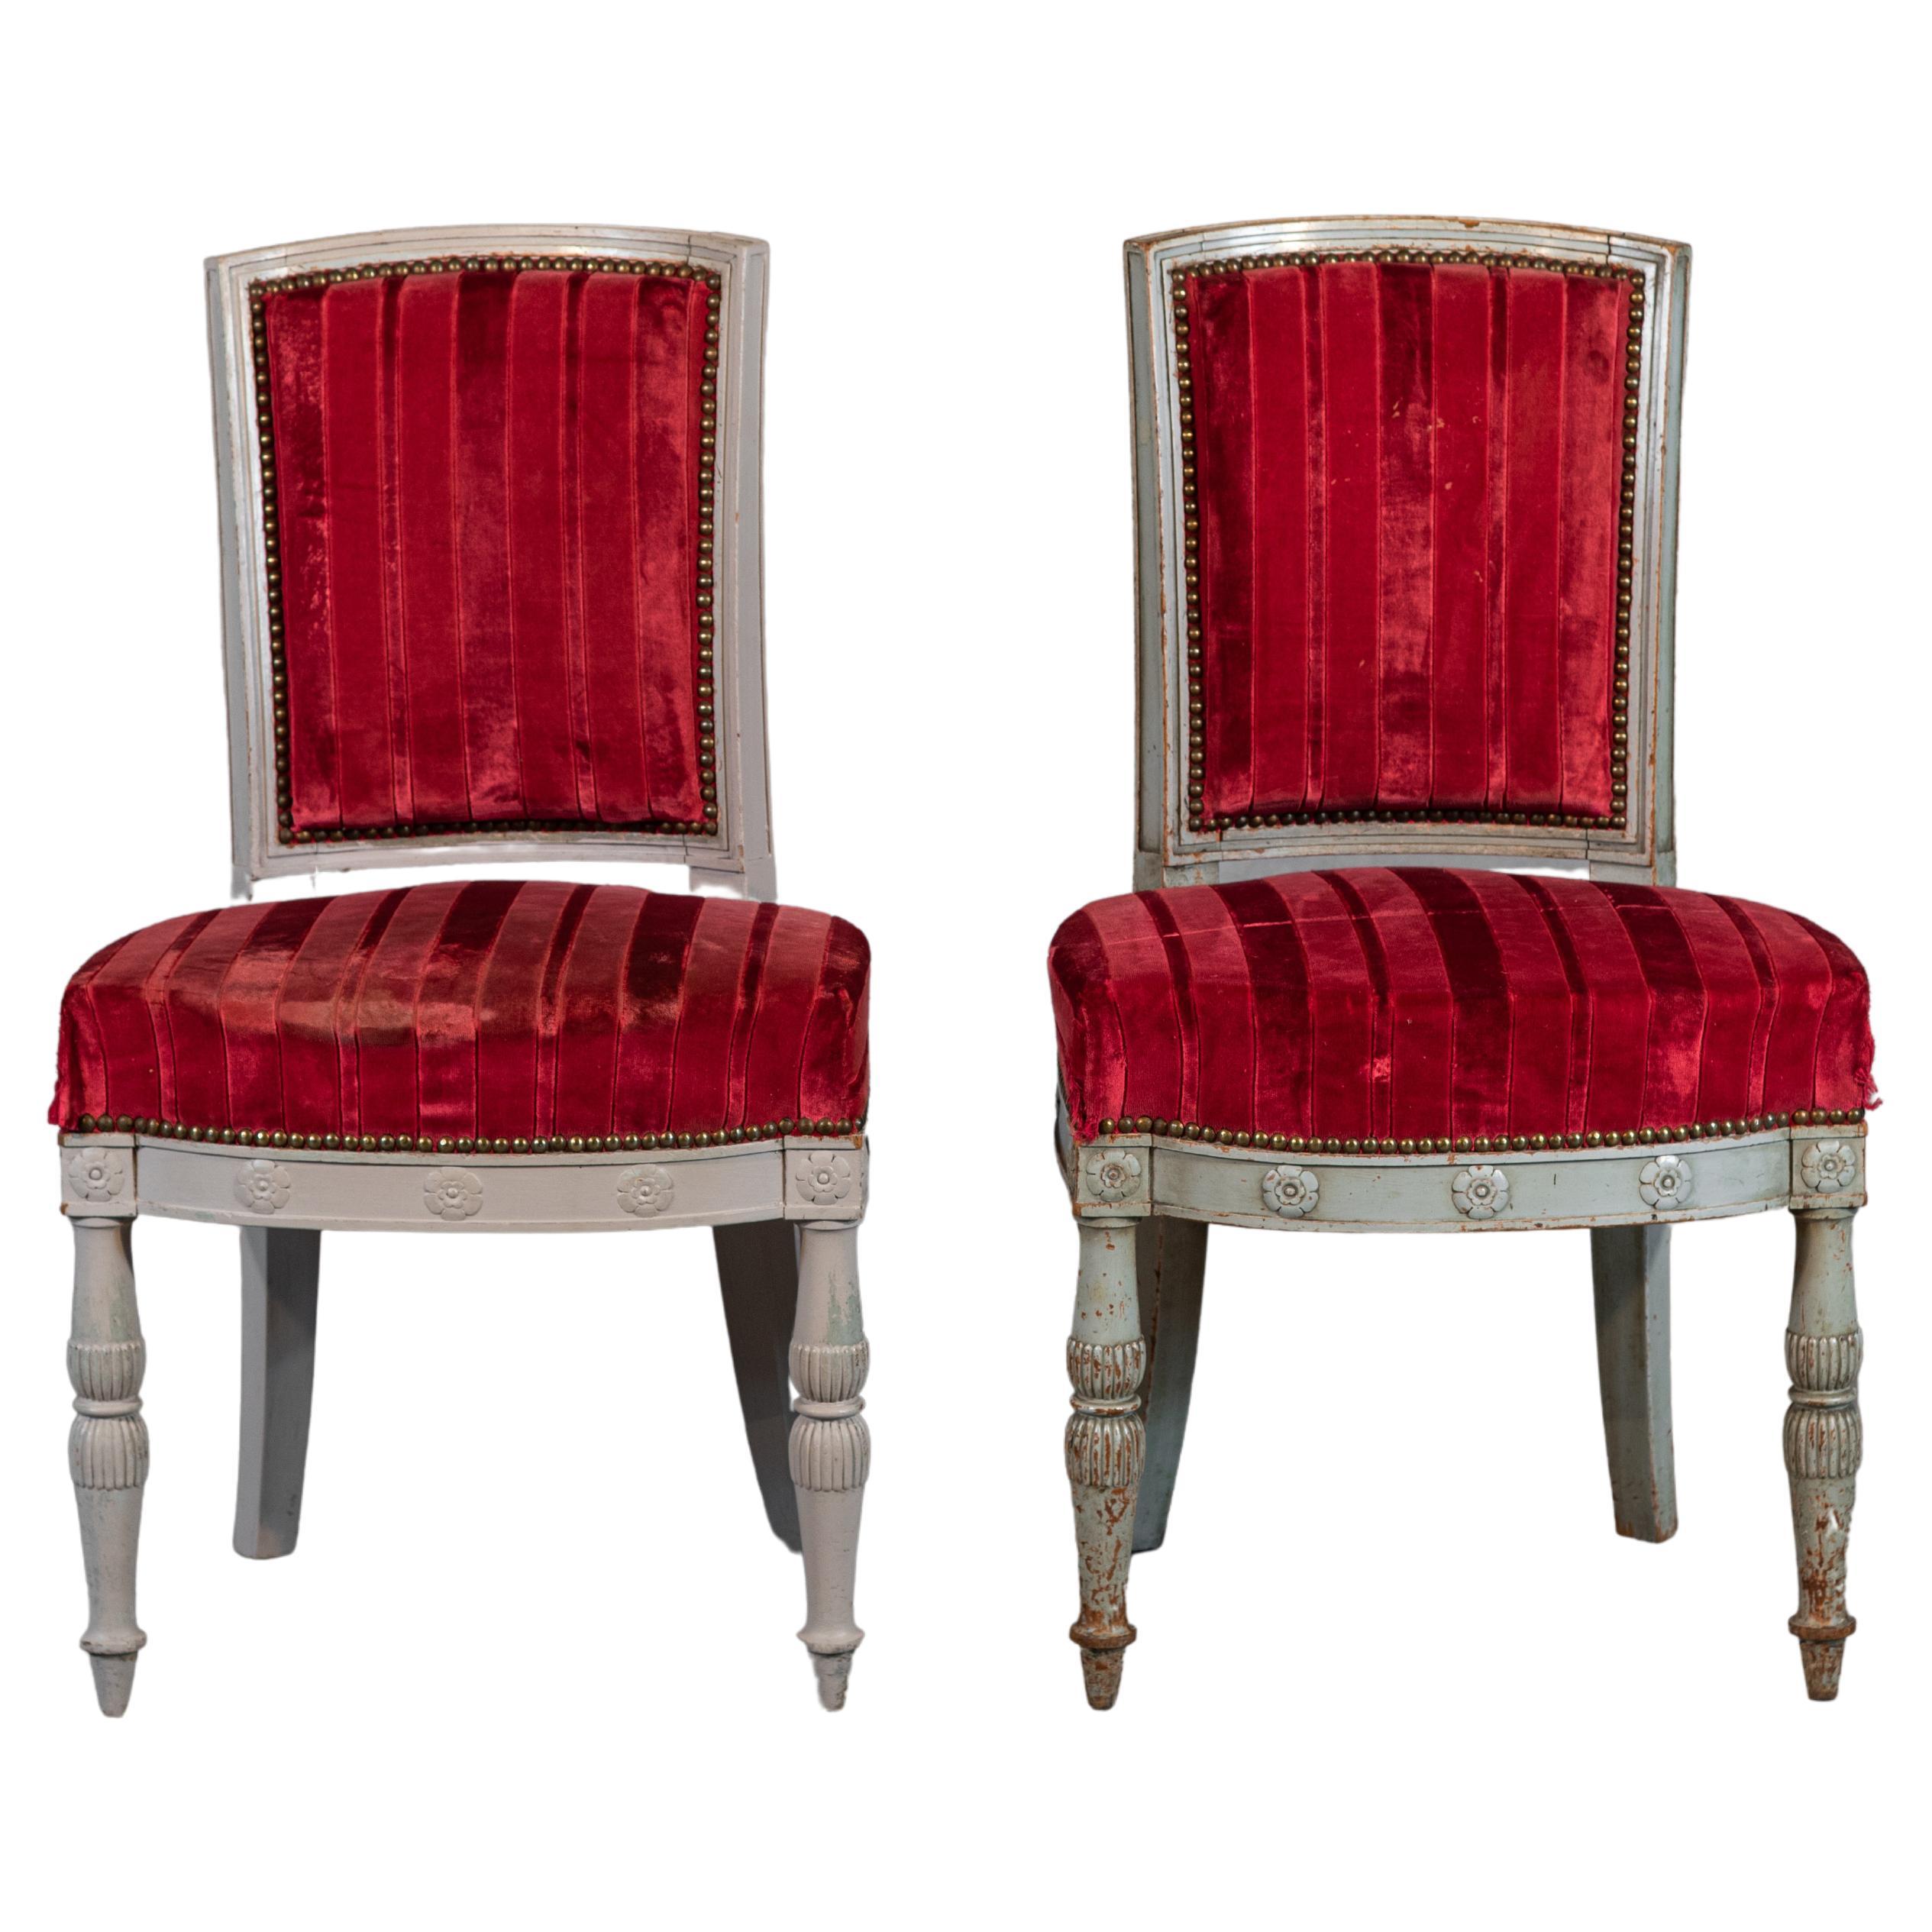 19th Century French Pair of Chairs